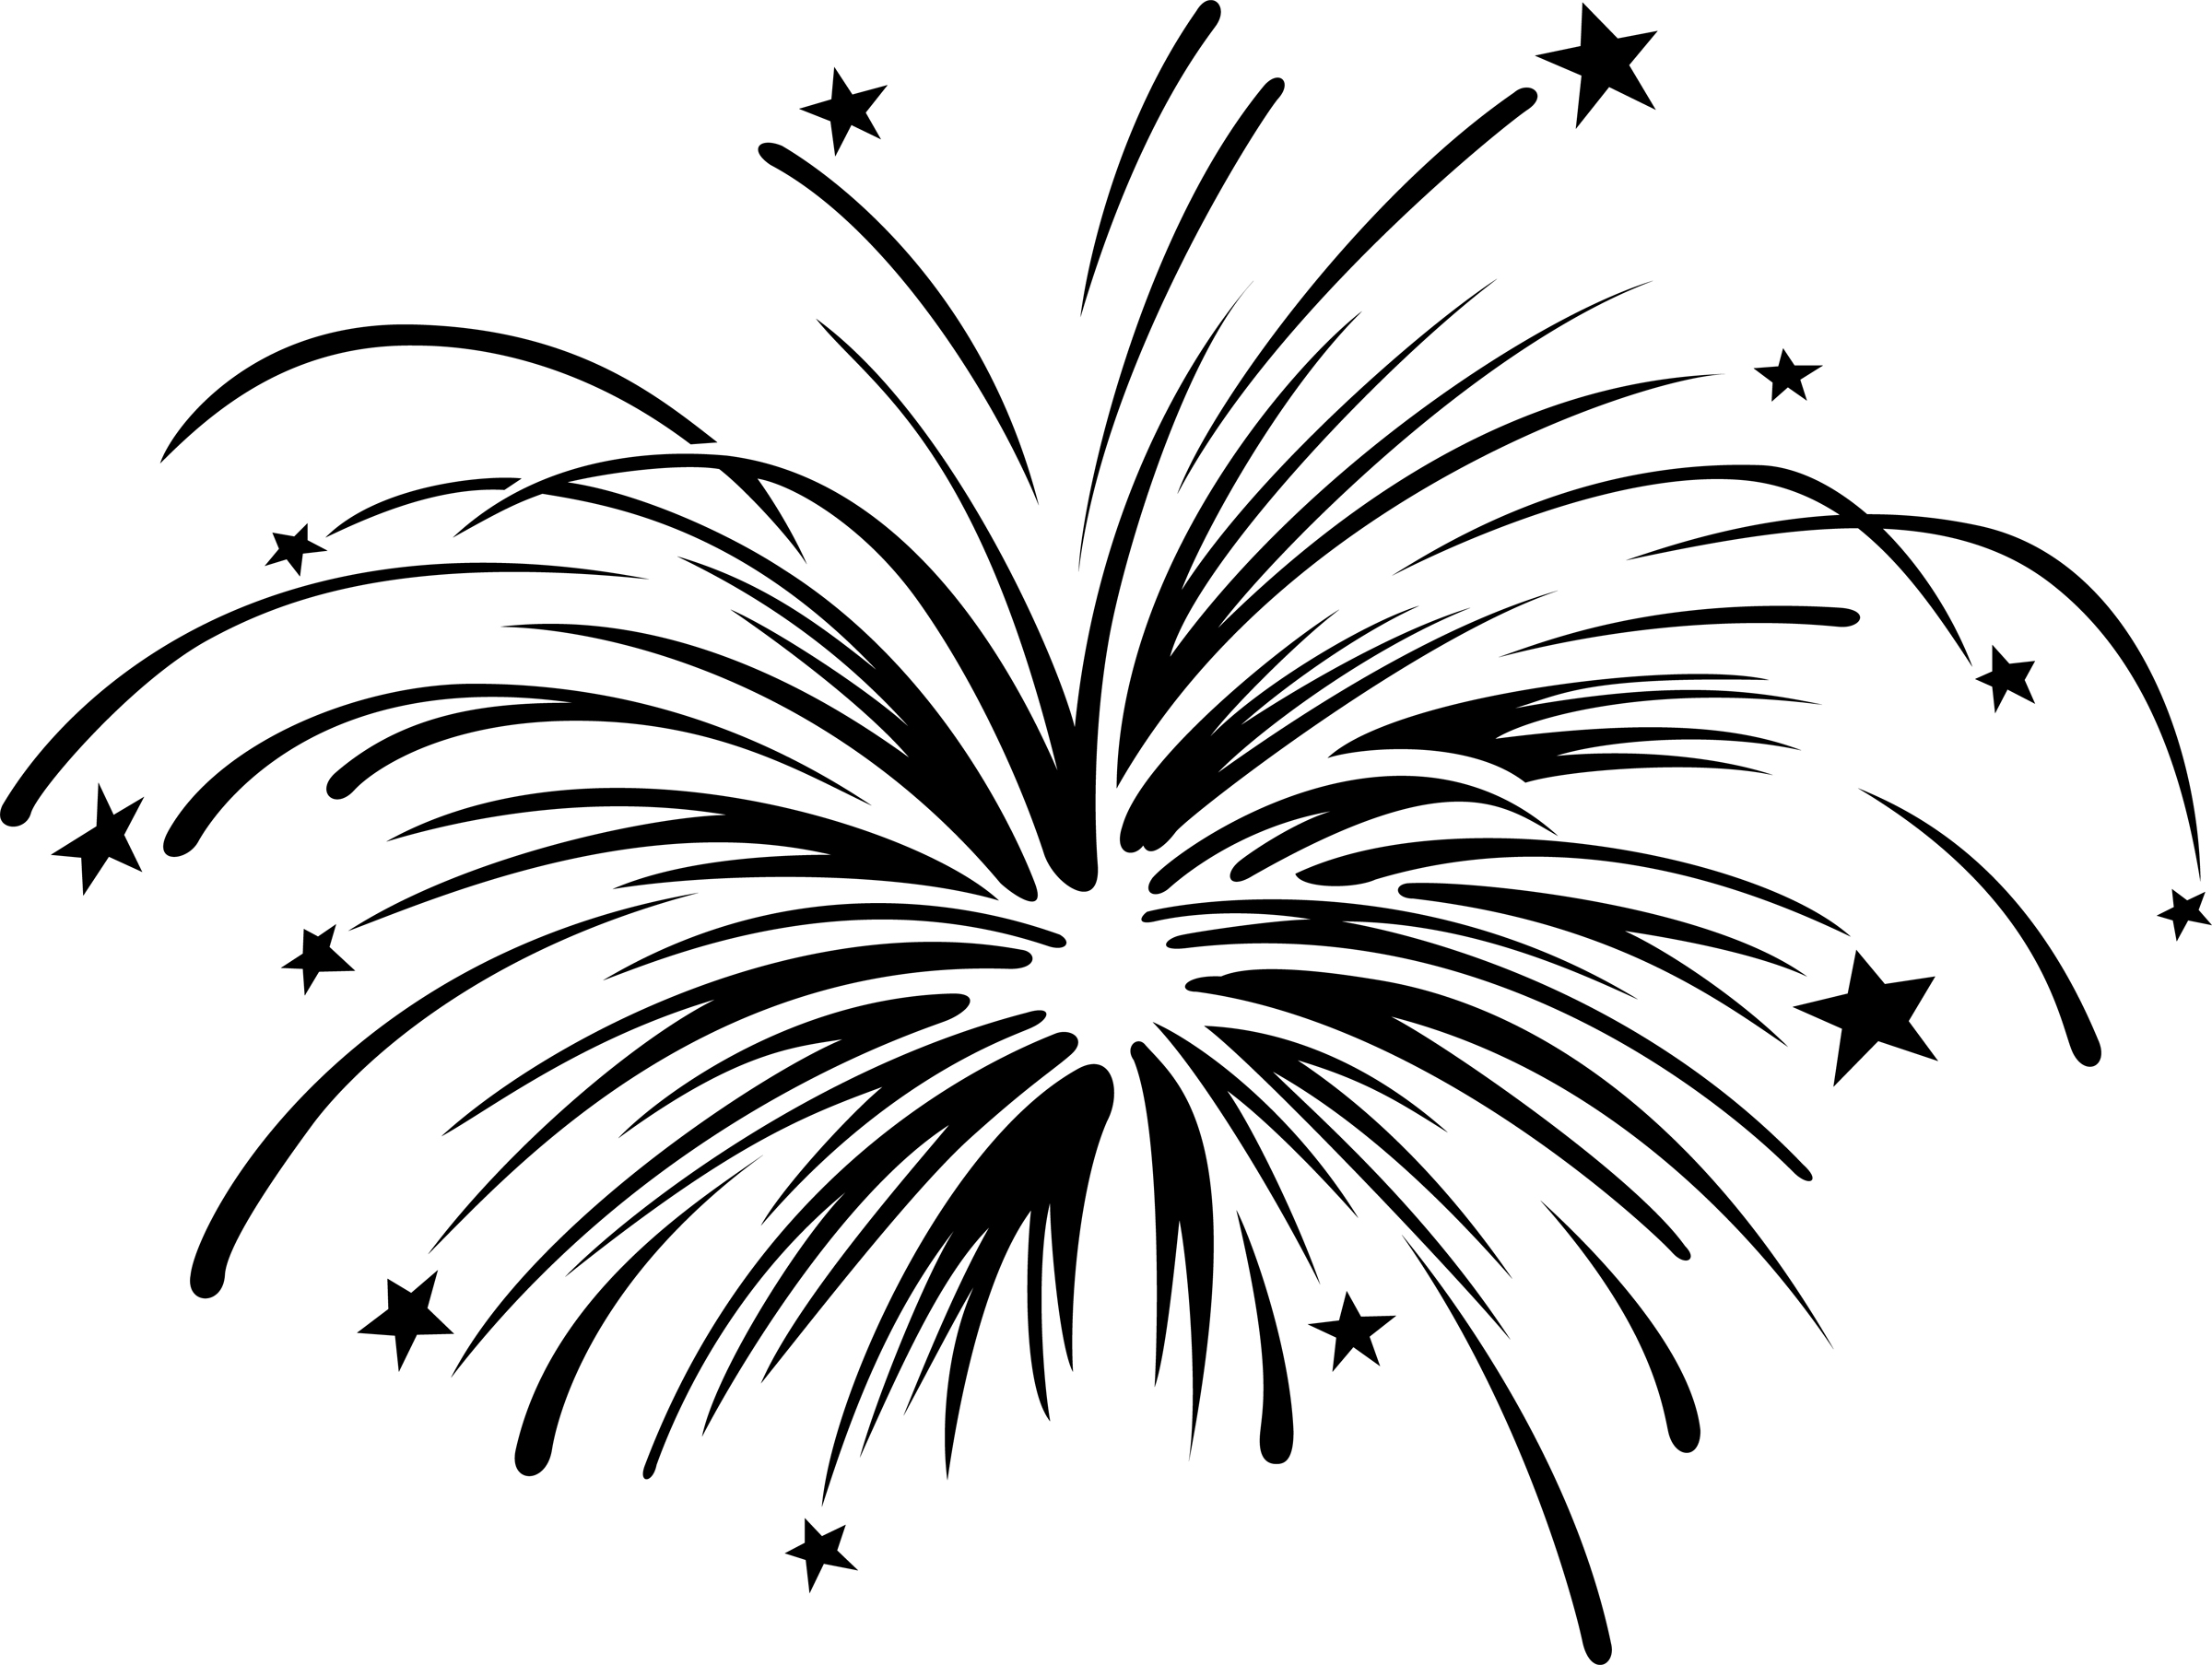 Fireworks Clipart Black And White - Free Clipart ...